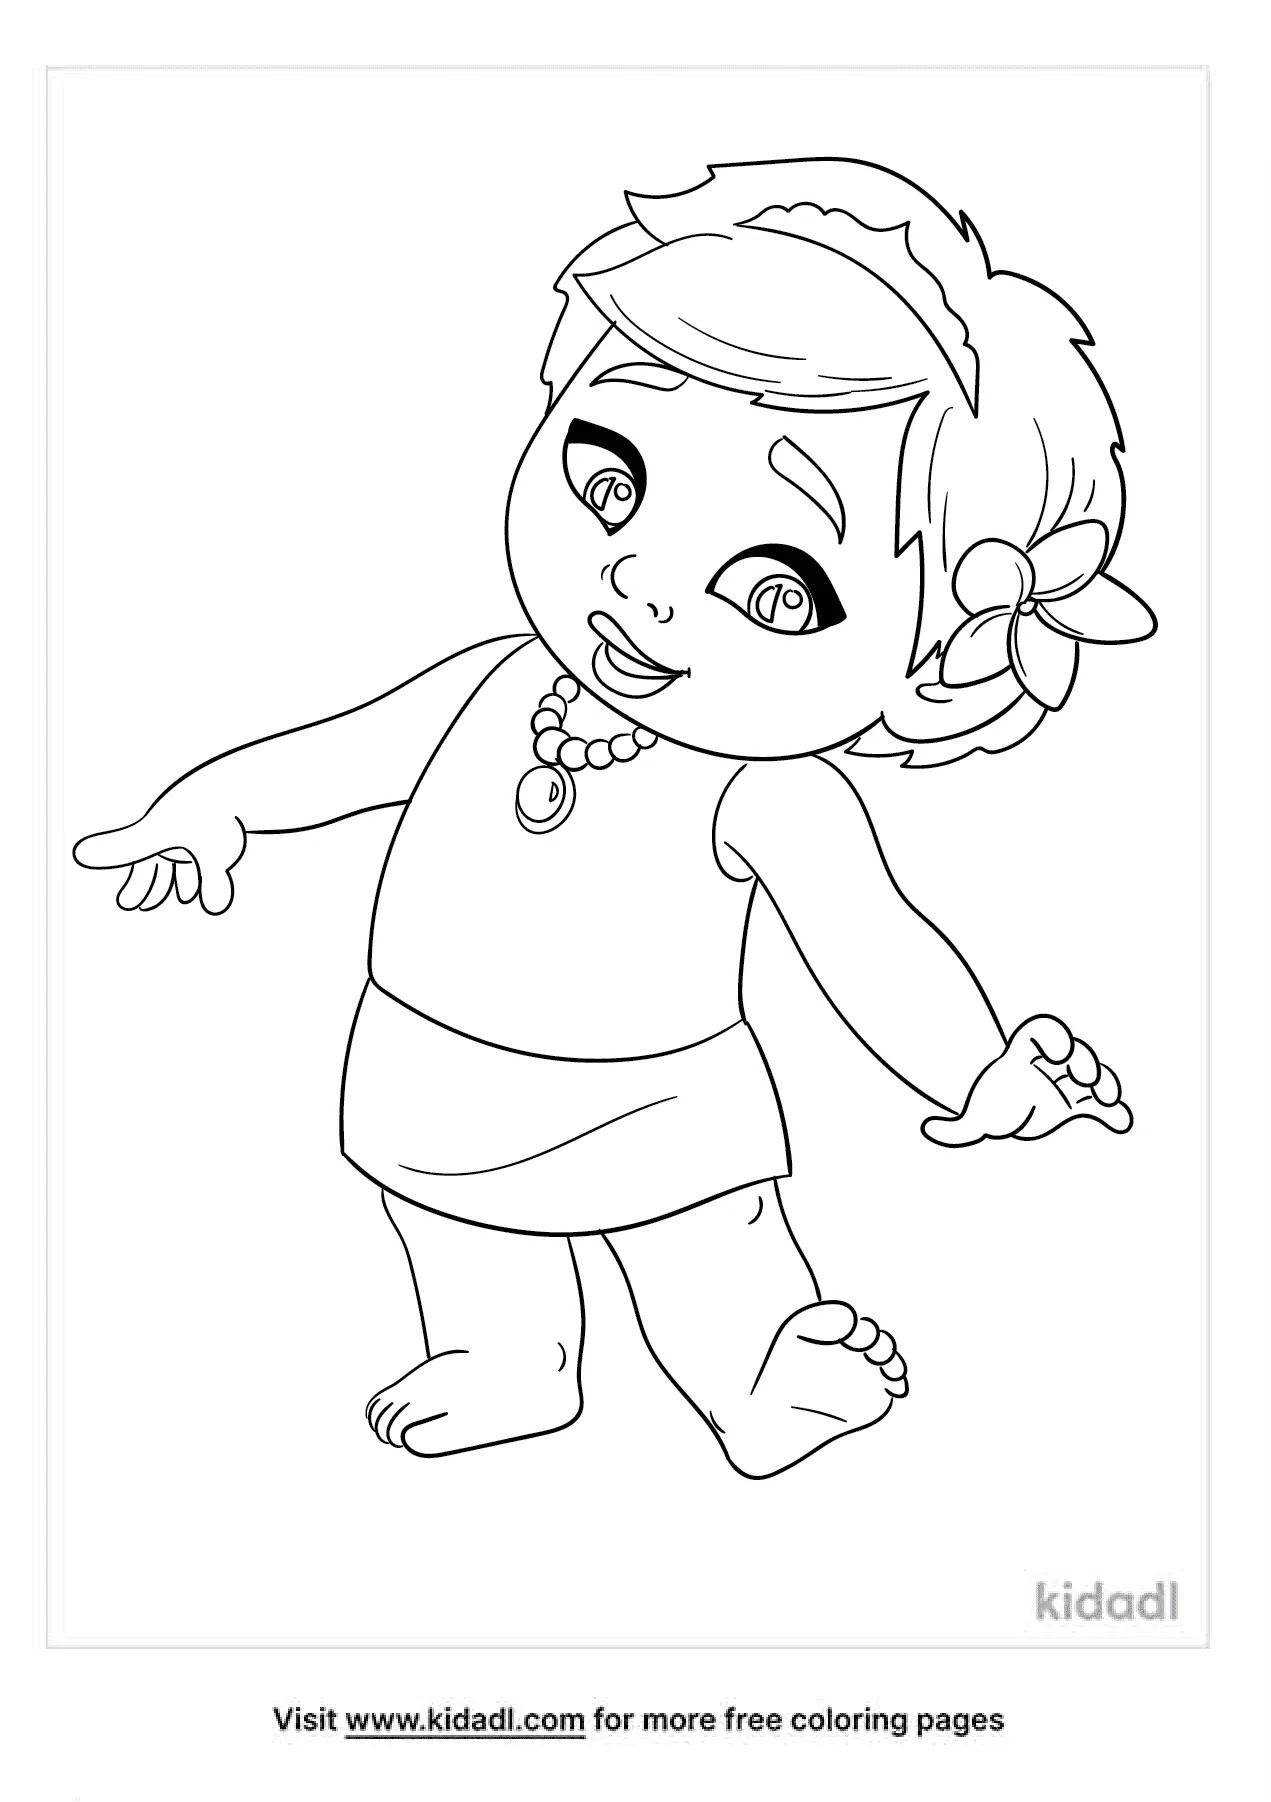 Baby Princess Coloring Pages   Free Princess Coloring Pages   Kidadl